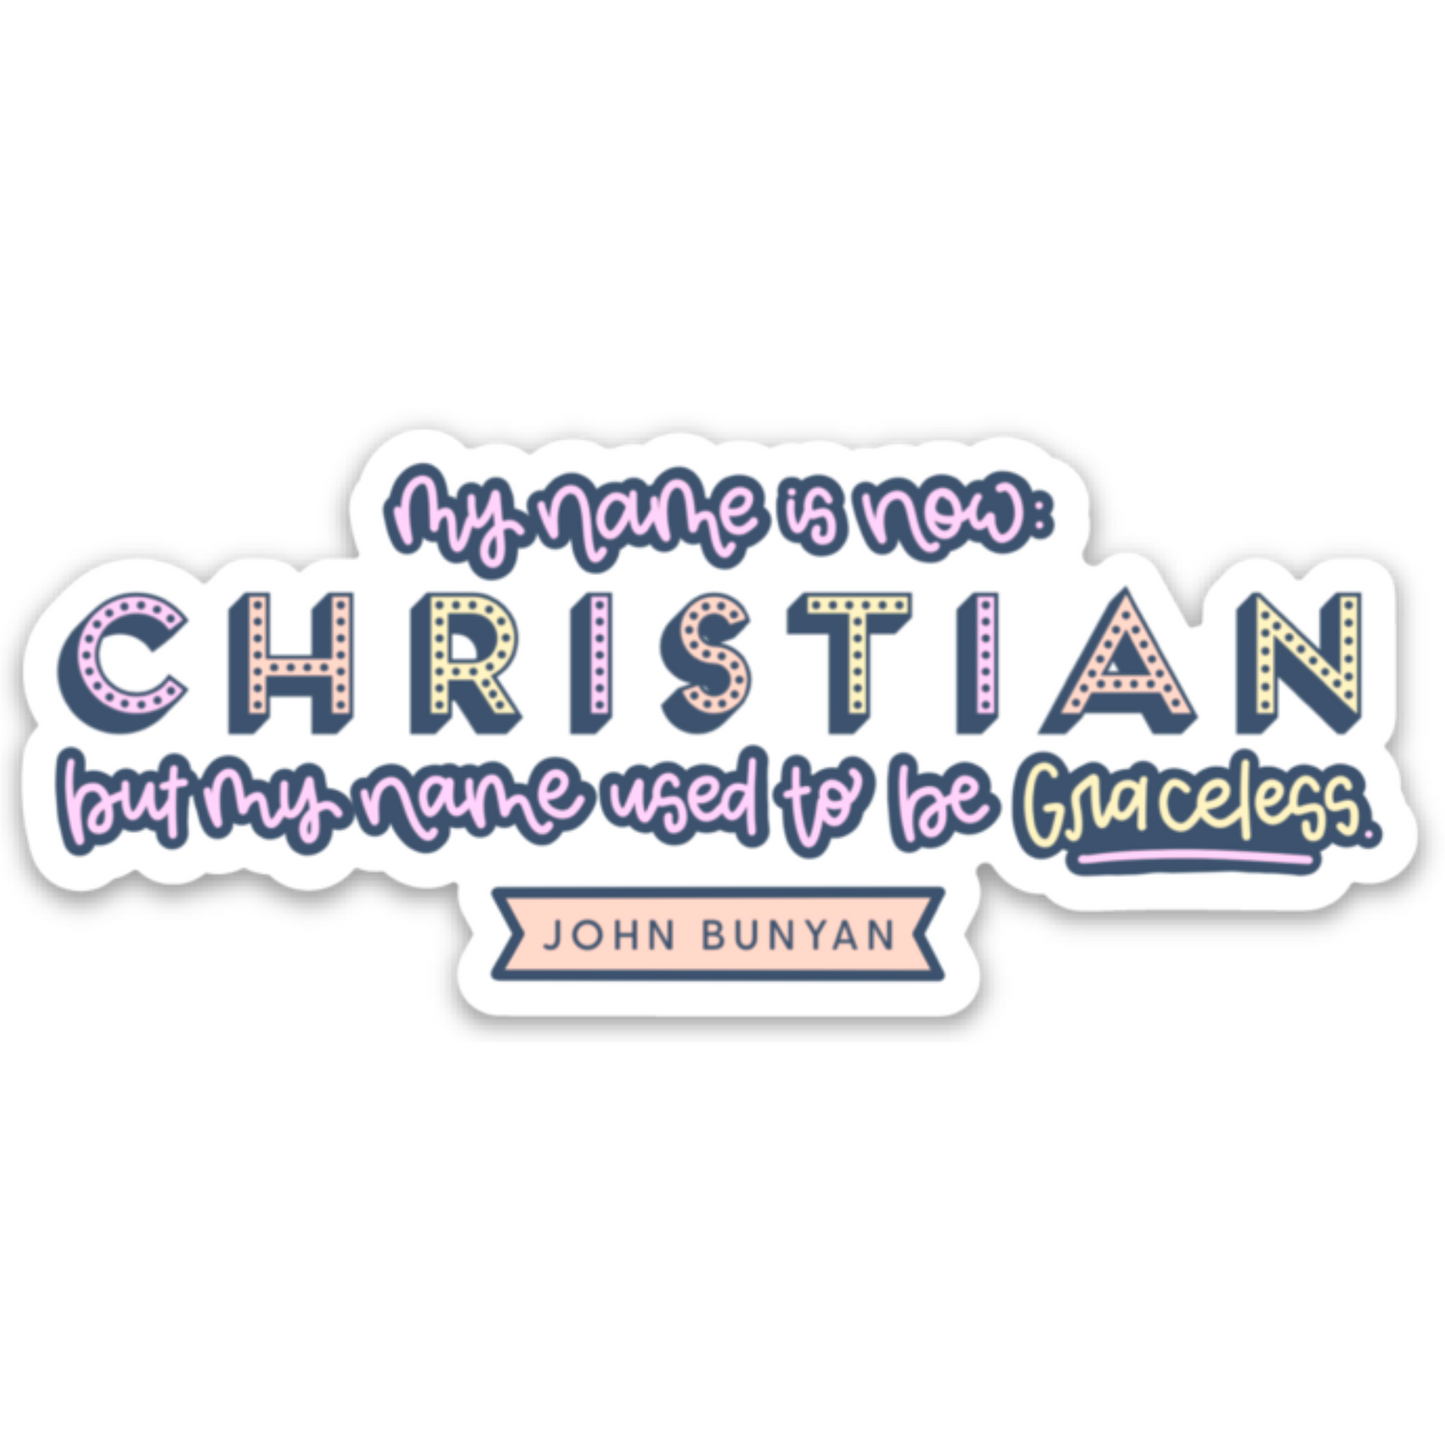 My name is now Christian | Vinyl Sticker